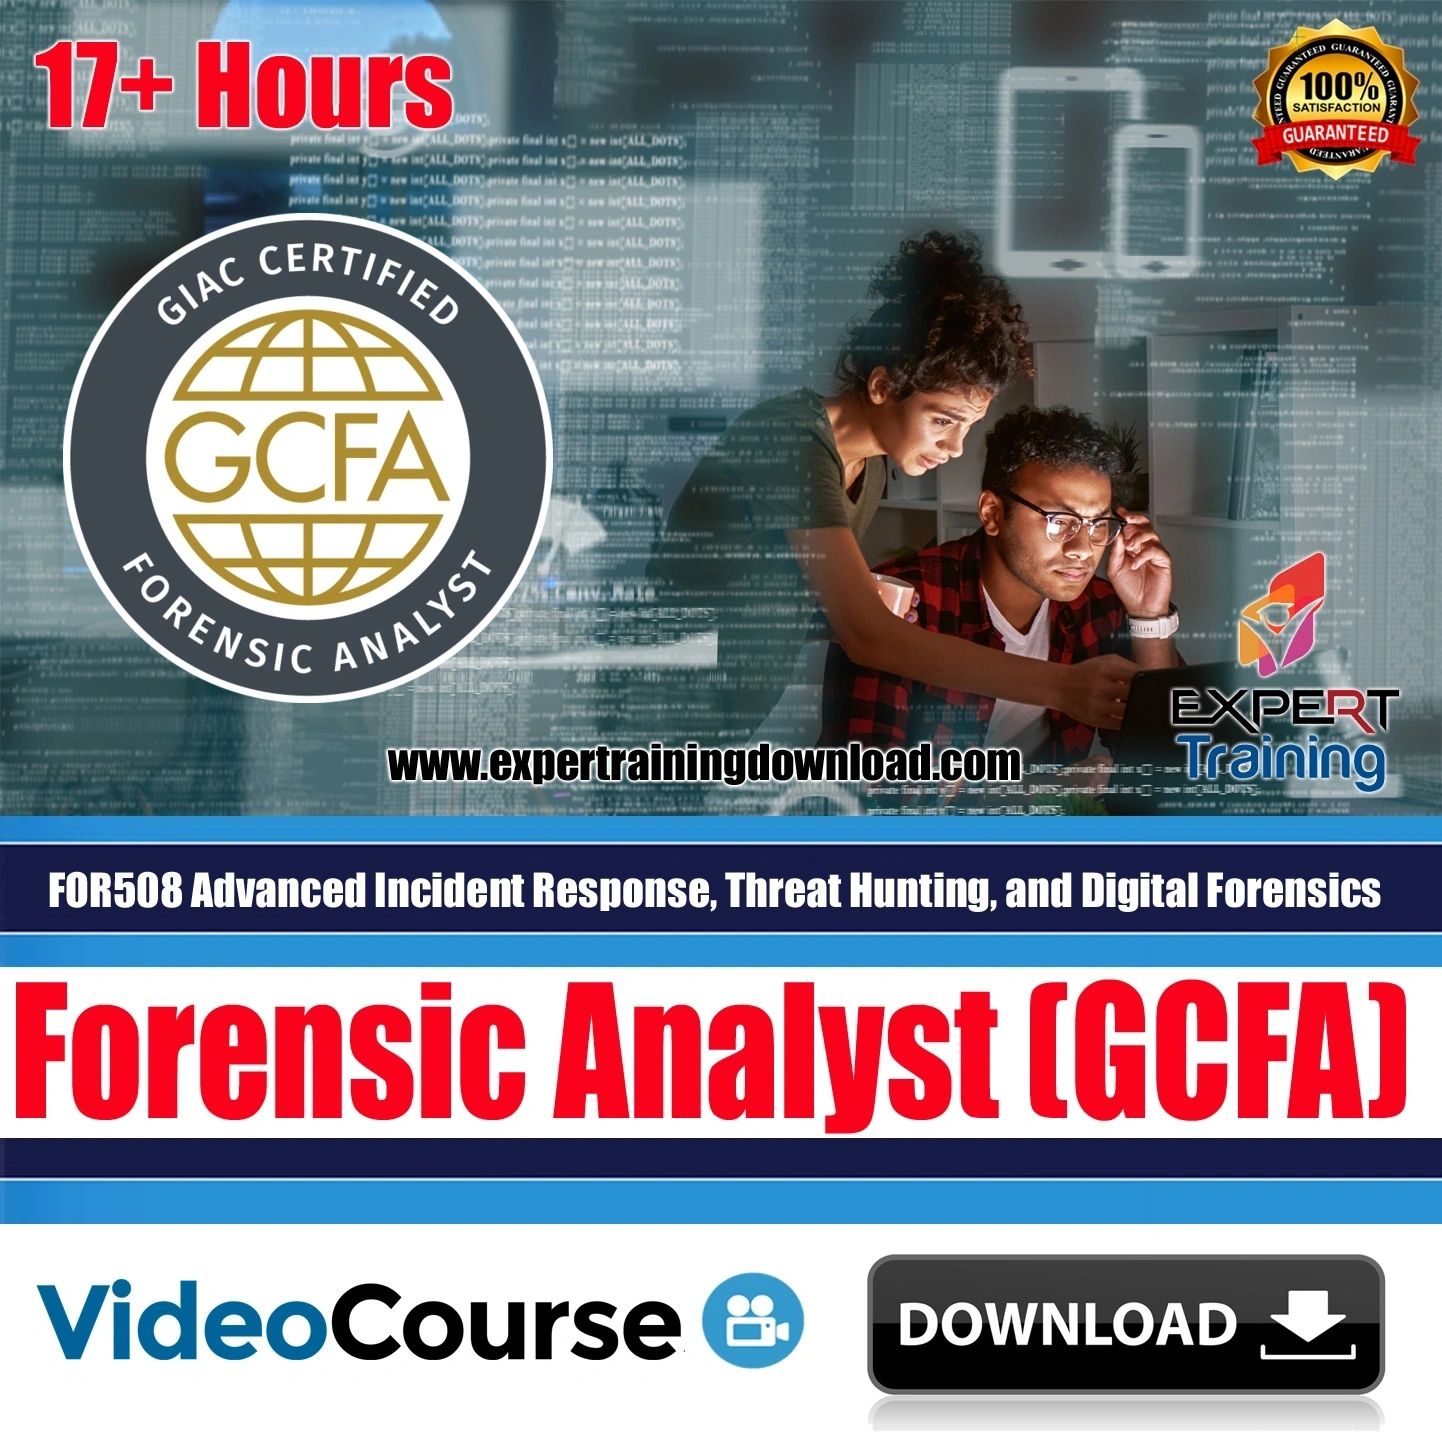 FOR508 Advanced Incident Response, Threat Hunting, and Digital Forensics